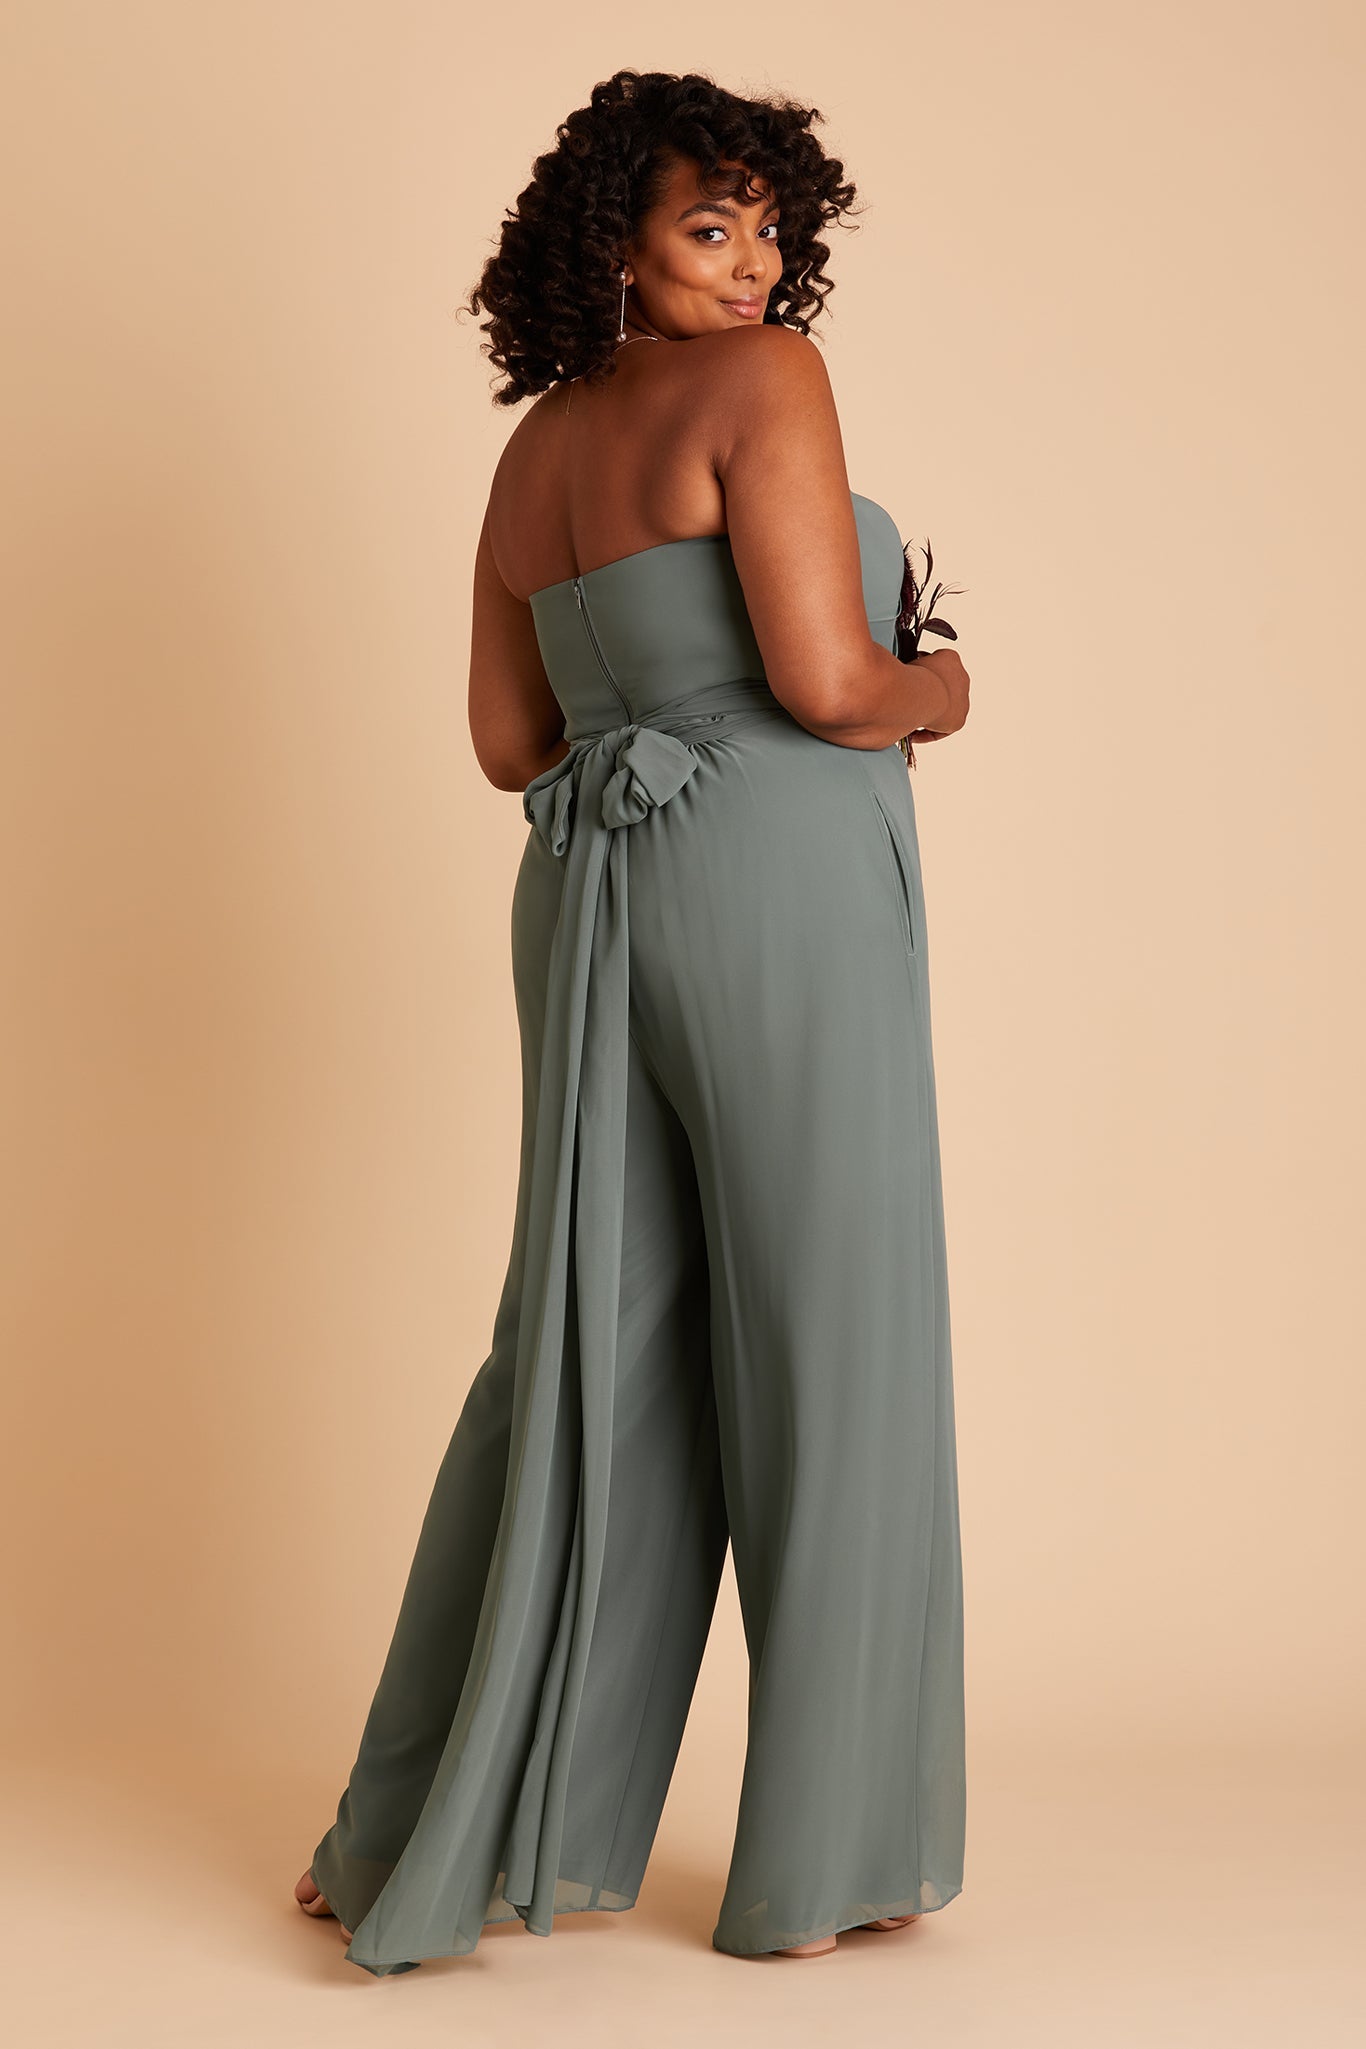 Gigi plus size convertible jumpsuit in sea glass chiffon by Birdy Grey, back view